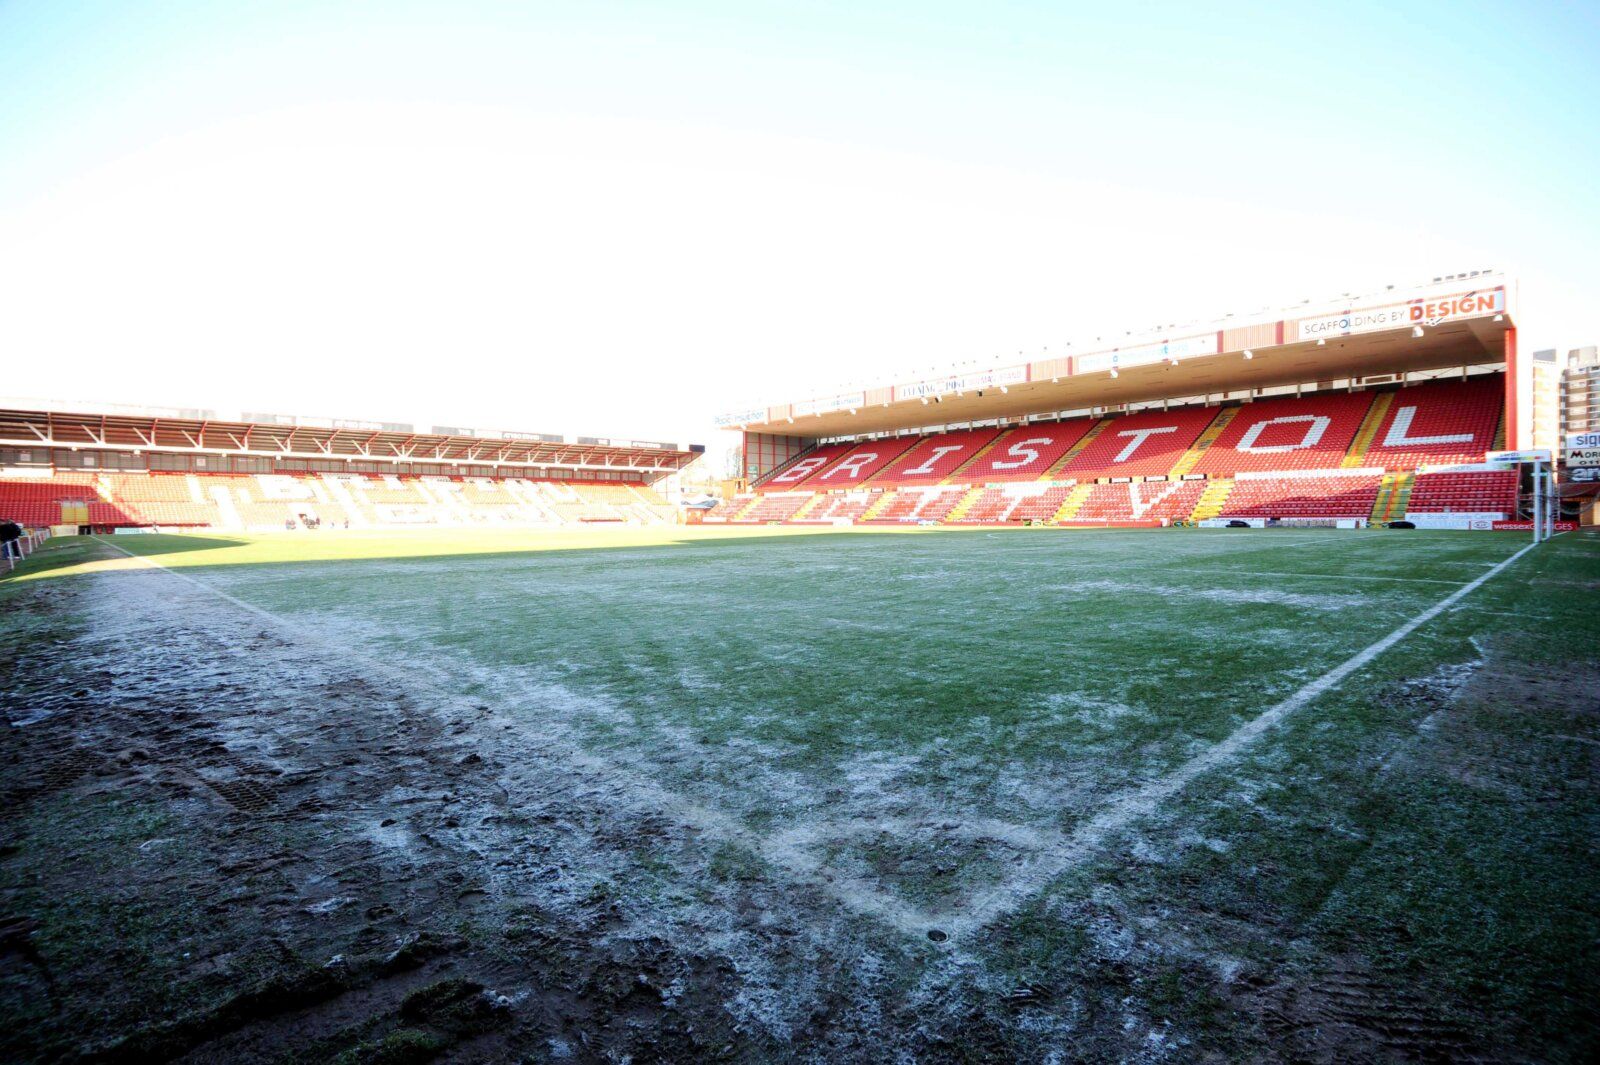 Football - Bristol City v Cardiff City FA Cup Third Round  - Ashton Gate - 09/10 - 2/1/10 
General View of the frozen pitch after the match was postponed 
Mandatory Credit: Action Images / Pete Luckhurst 
Livepic